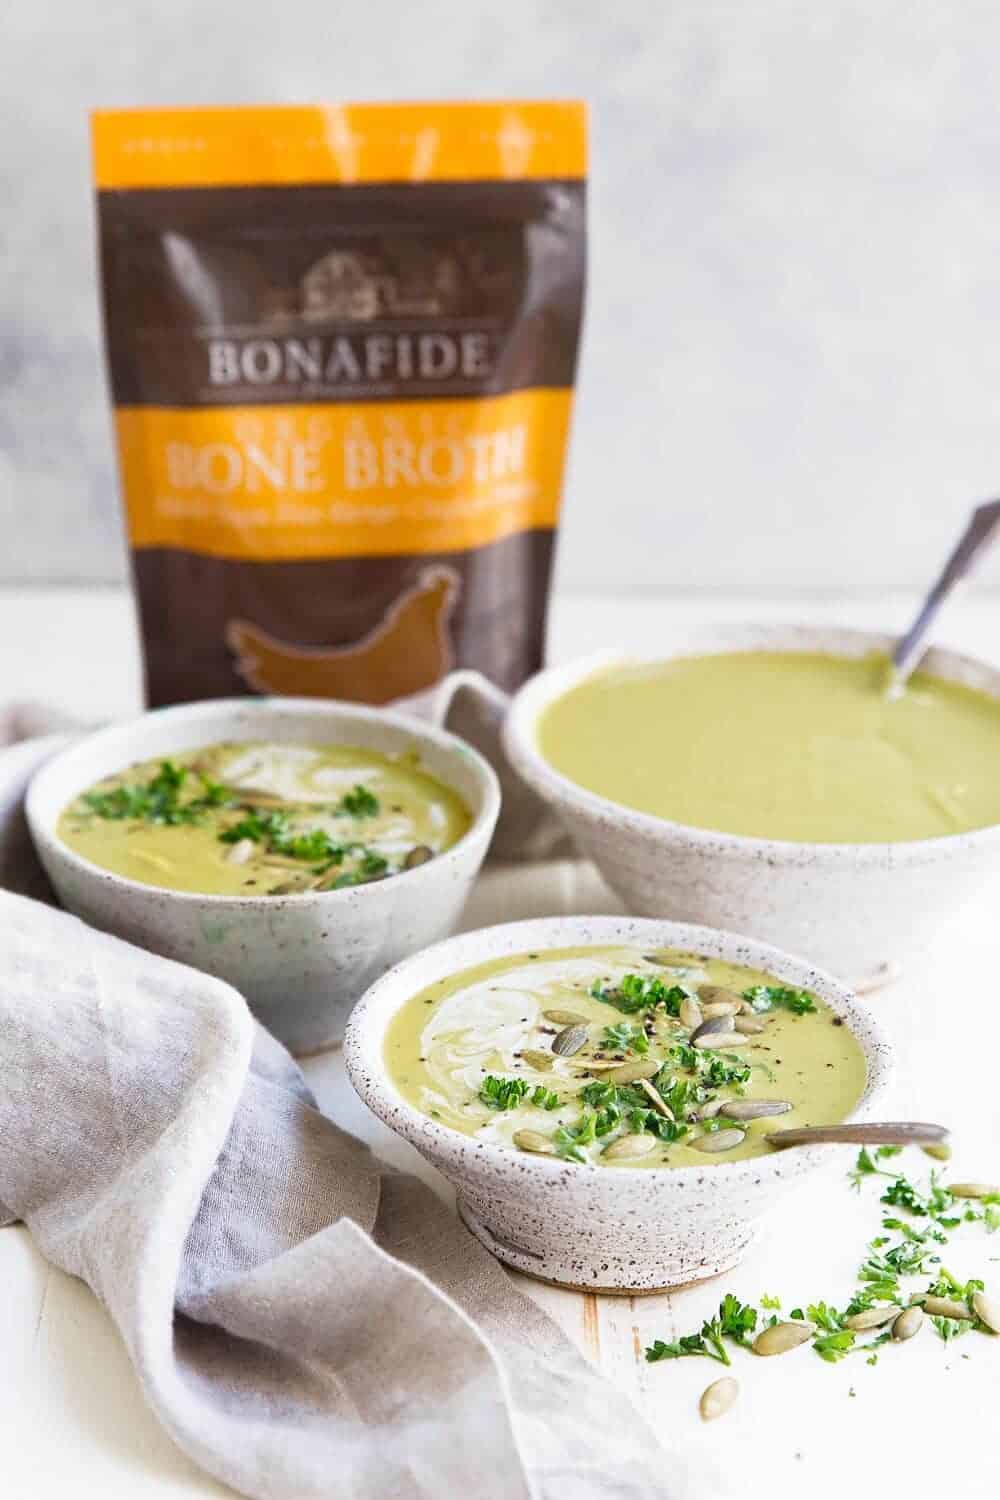 Whole30 Cream of Broccoli Soup with a packet of bonafide bone broth